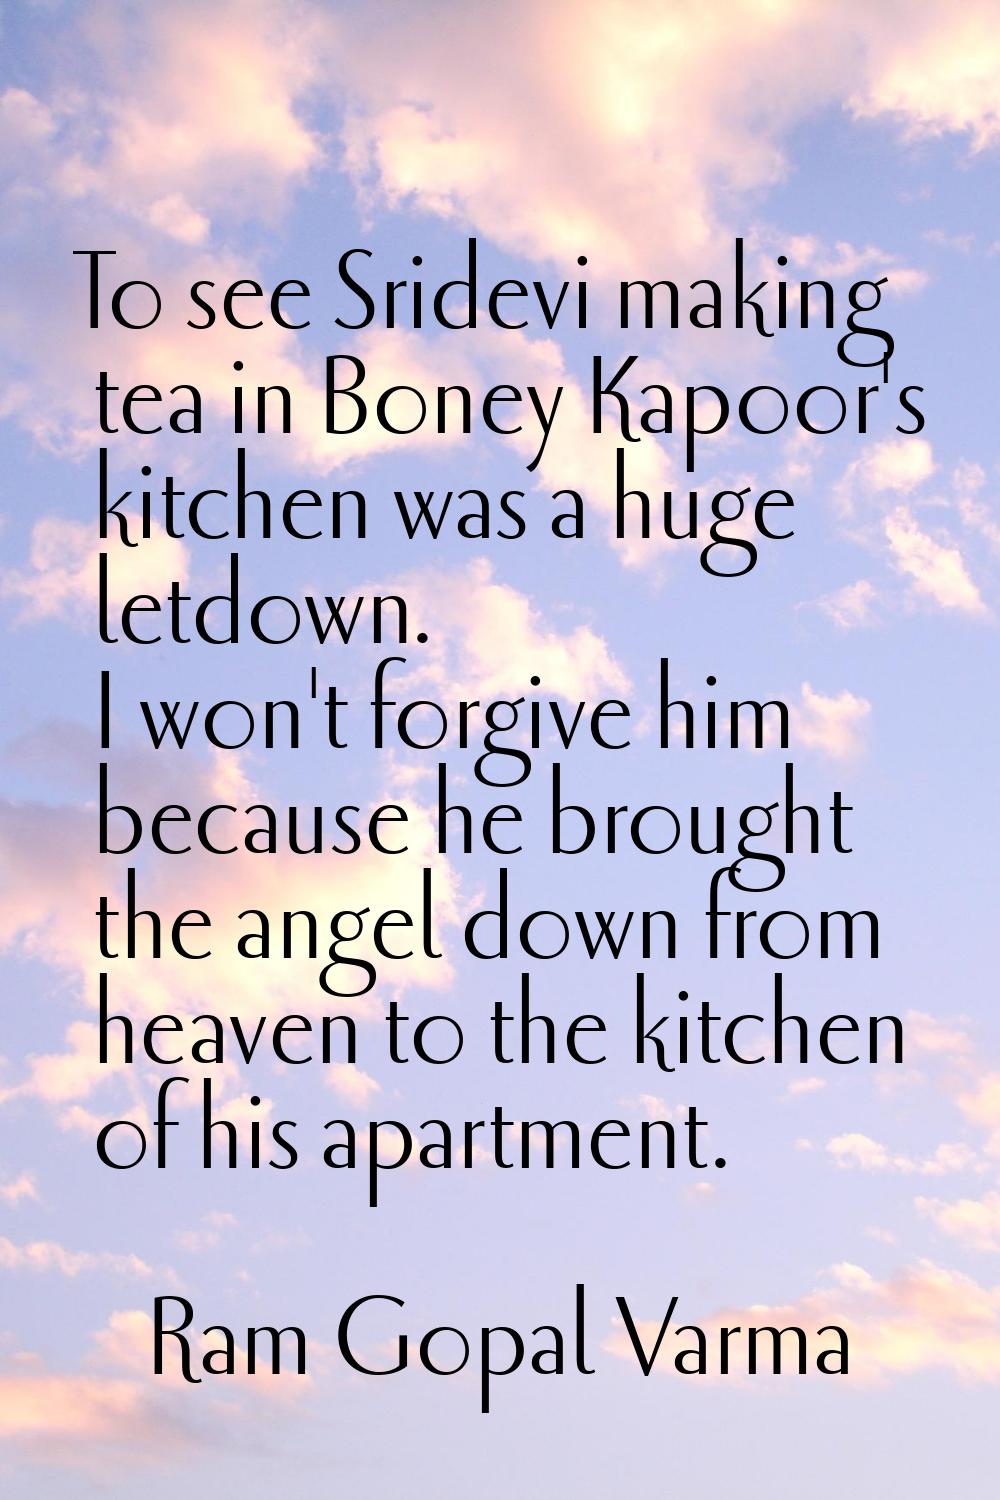 To see Sridevi making tea in Boney Kapoor's kitchen was a huge letdown. I won't forgive him because